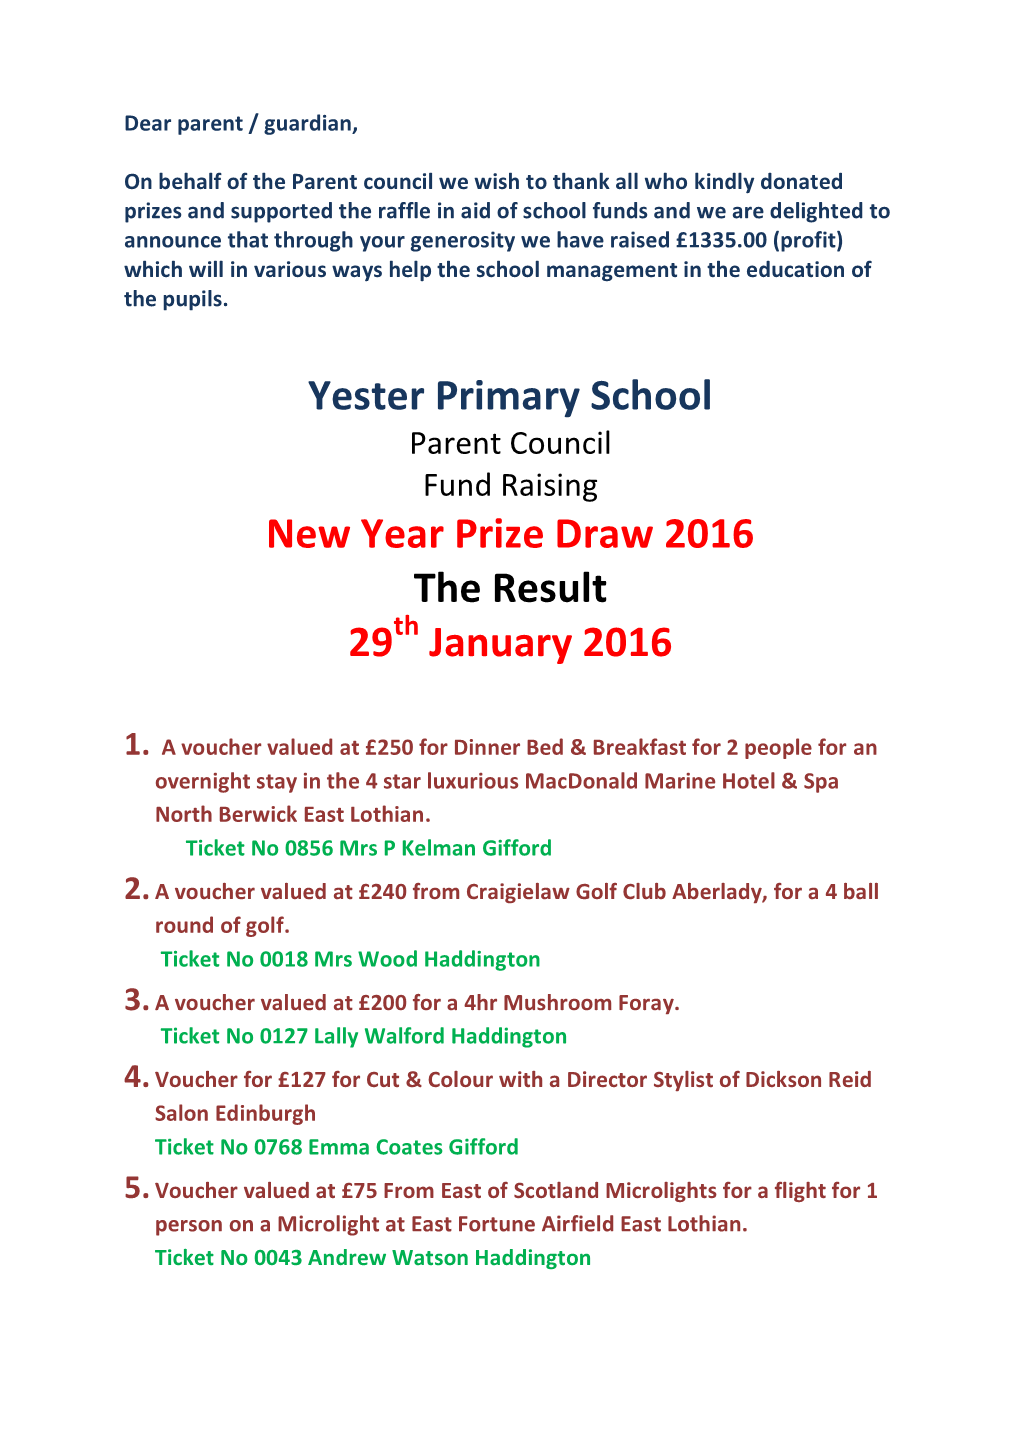 Yester Primary School New Year Prize Draw 2016 the Result 29 January